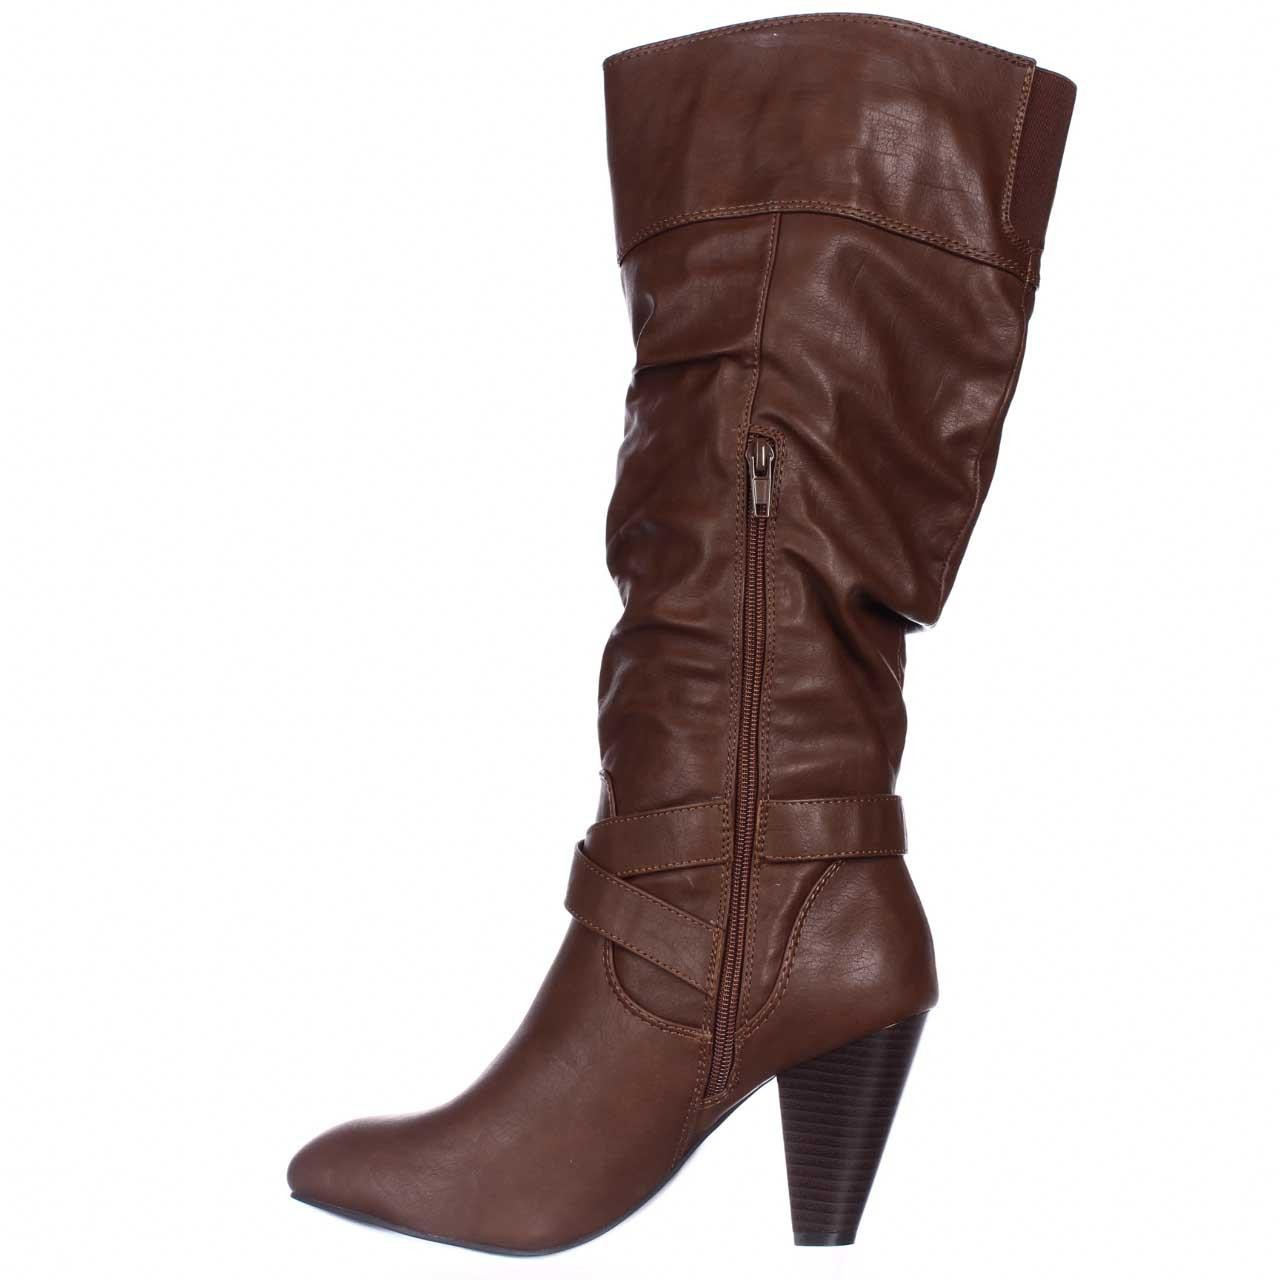 Lyst - Rampage Eliven Mid-calf Boots in Brown